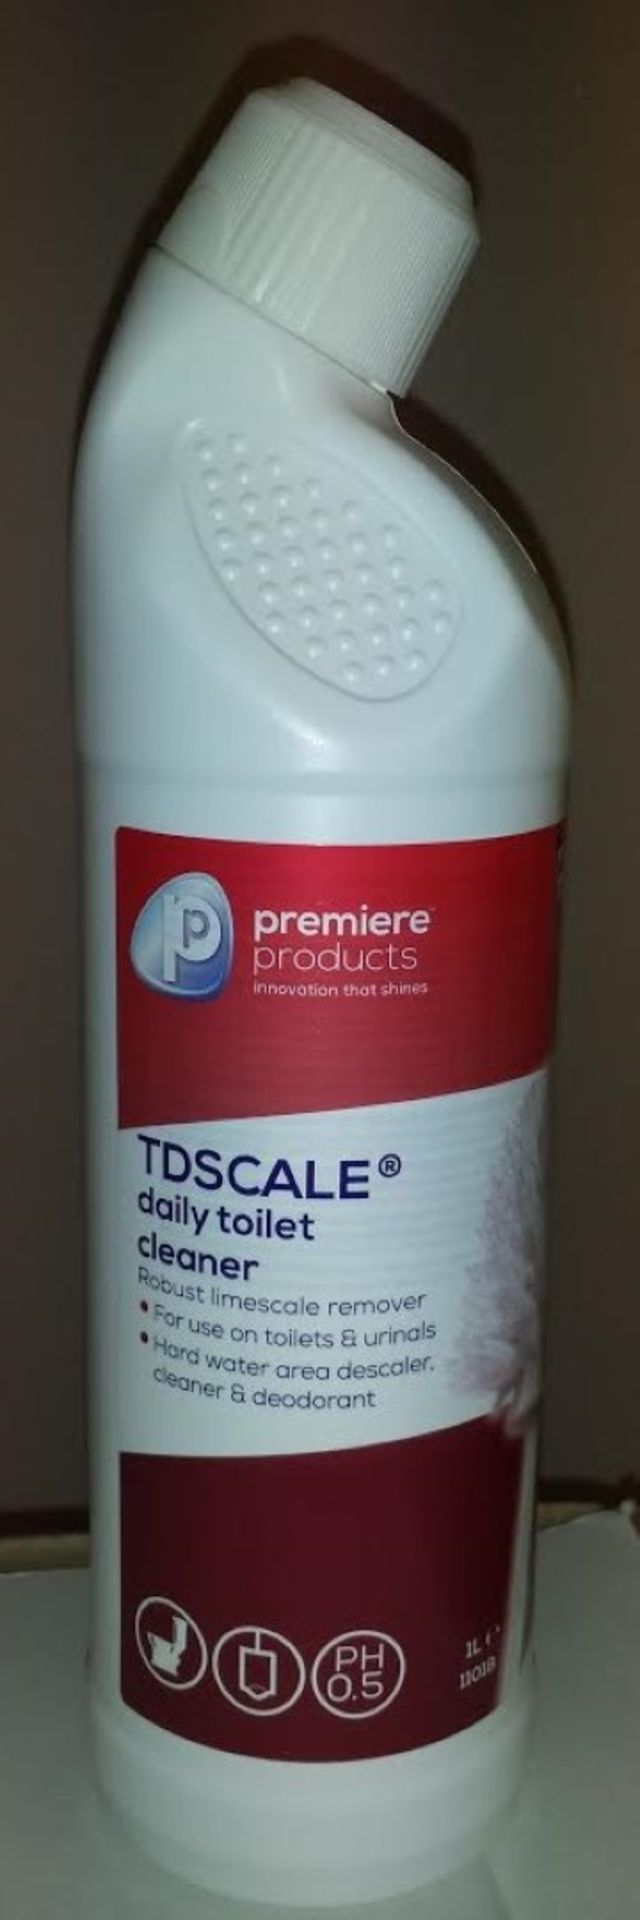 12 x Premiere 1 Litre TD Scale Daily Toilet Cleaner - Robust Limescale Remover - Premiere Products -